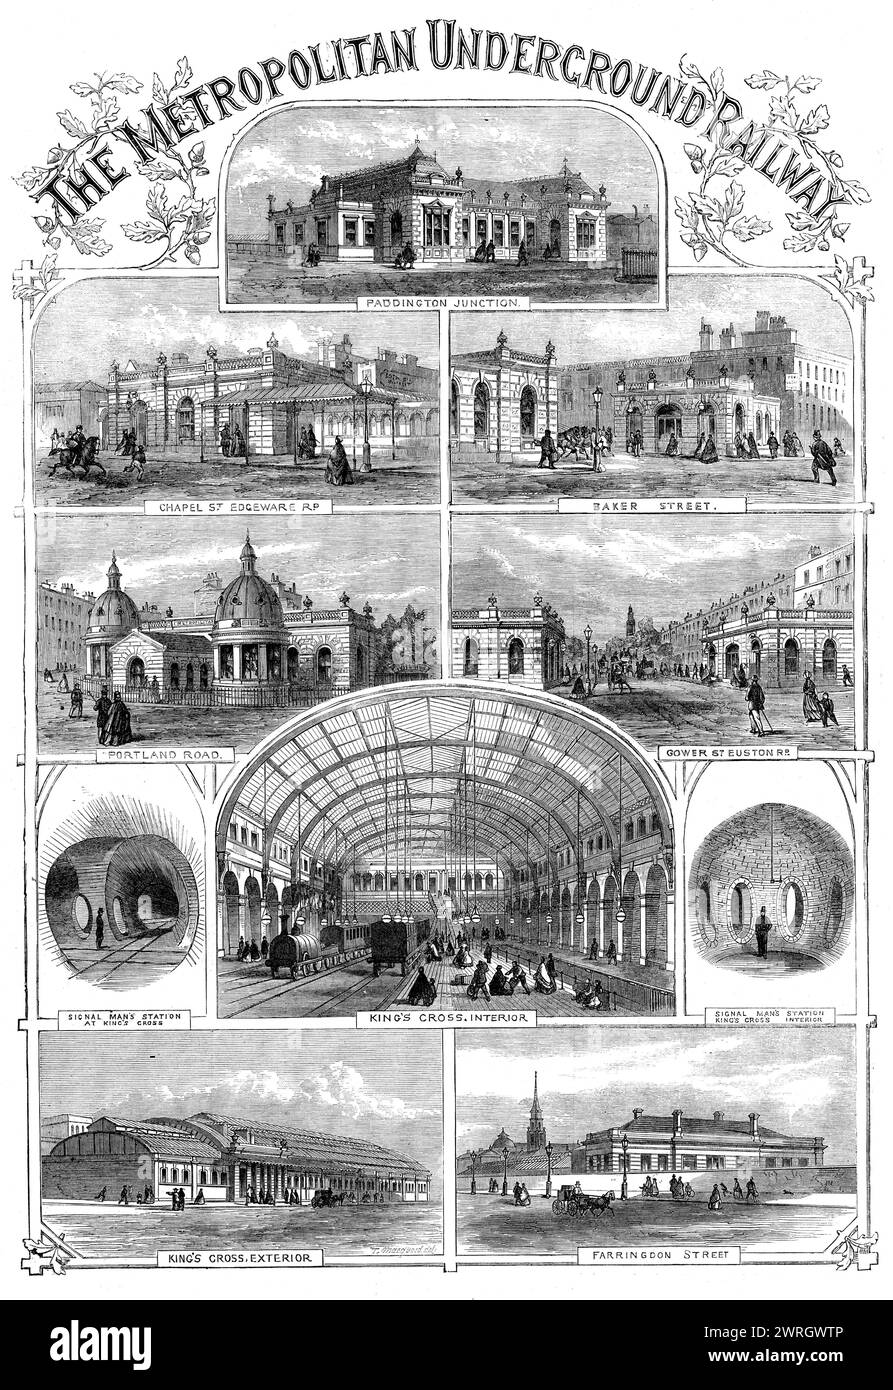 The Metropolitan Underground Railway, 1862. Stations of the world's first passenger-carrying designated underground railway. 'Paddington Junction; Chapel St. Edgeware Rd.; Baker Street; Portland Road; Gower St. Euston Rd.; signal man's station at King's Cross; King's Cross, interior; signal man's station at King's Cross - interior; King's Cross, exterior; Farringdon Street...the great idea of burrowing beneath what may be called the venous system of London - that is, its reticulation of gas, water, and sewage pipes - and creating a huge artery along which a stream of traffic should constantly Stock Photo